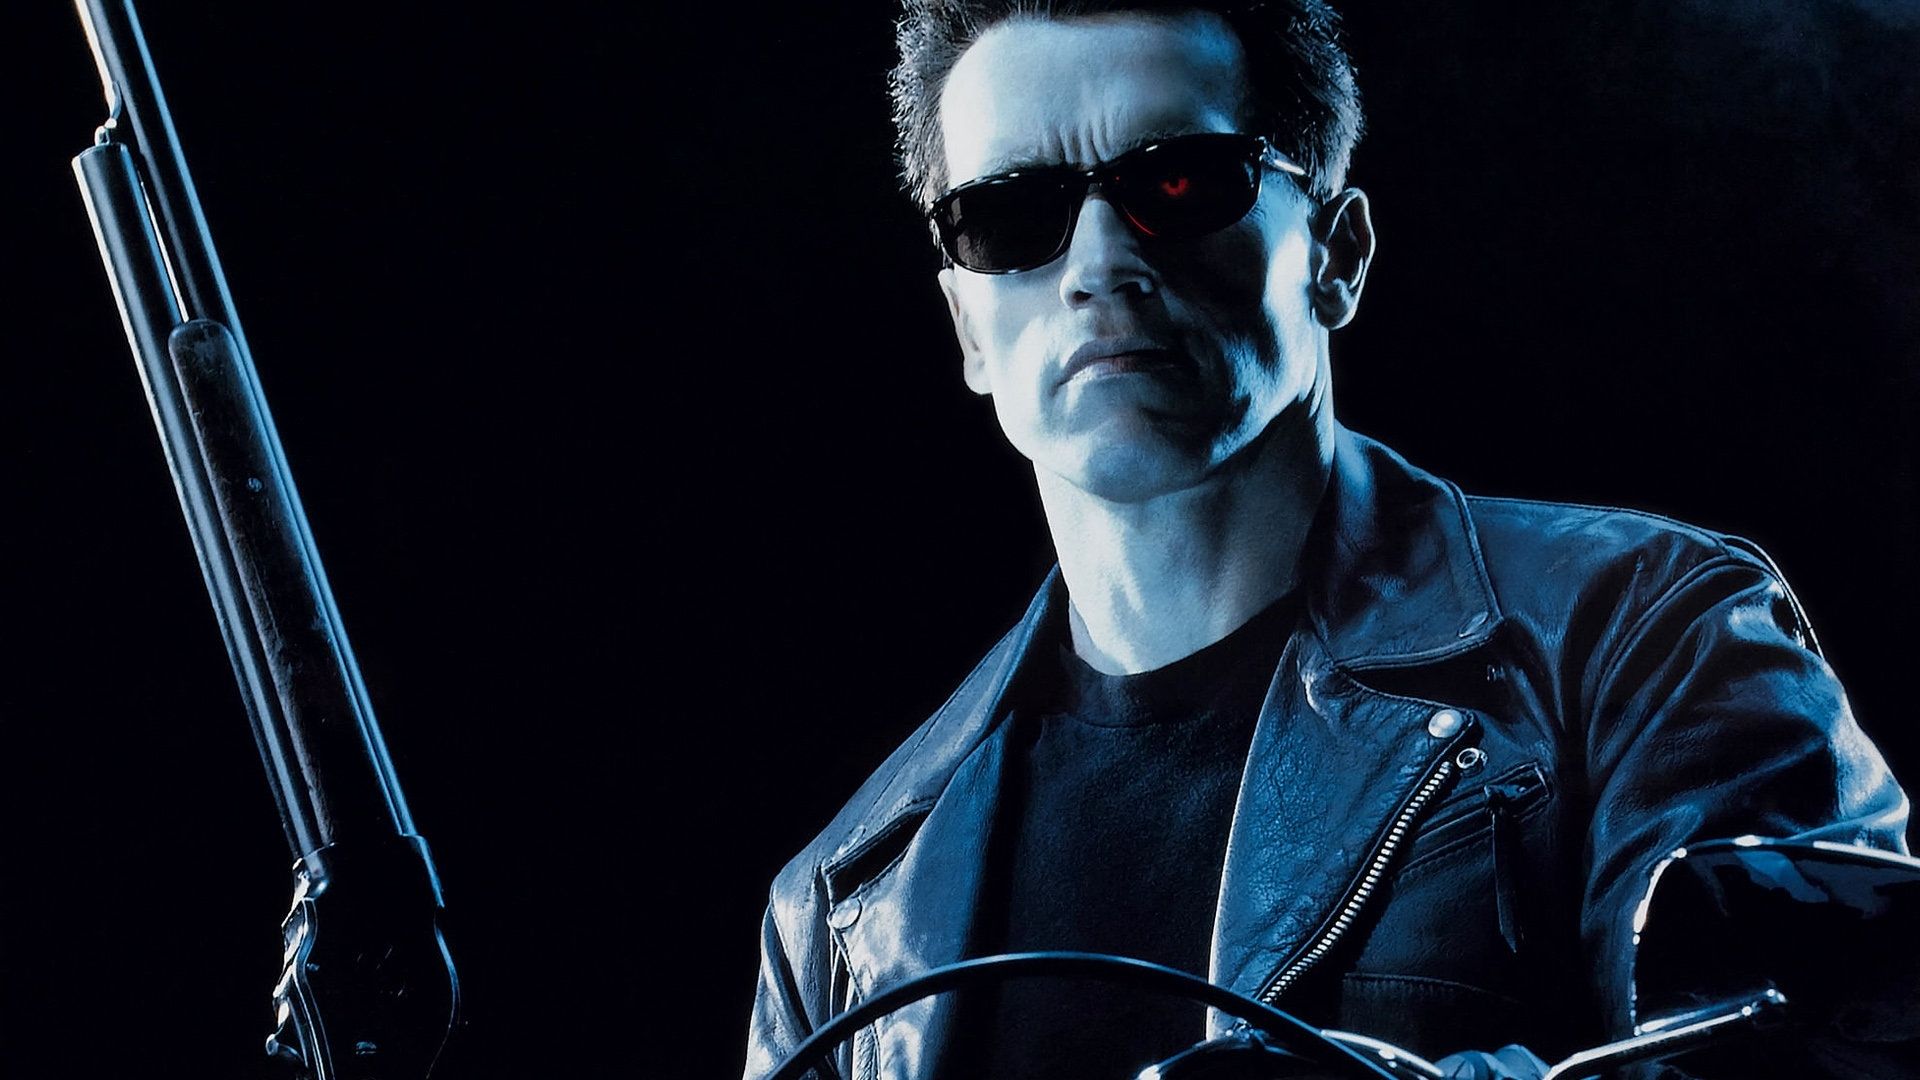 Terminator 2: Judgment Day background